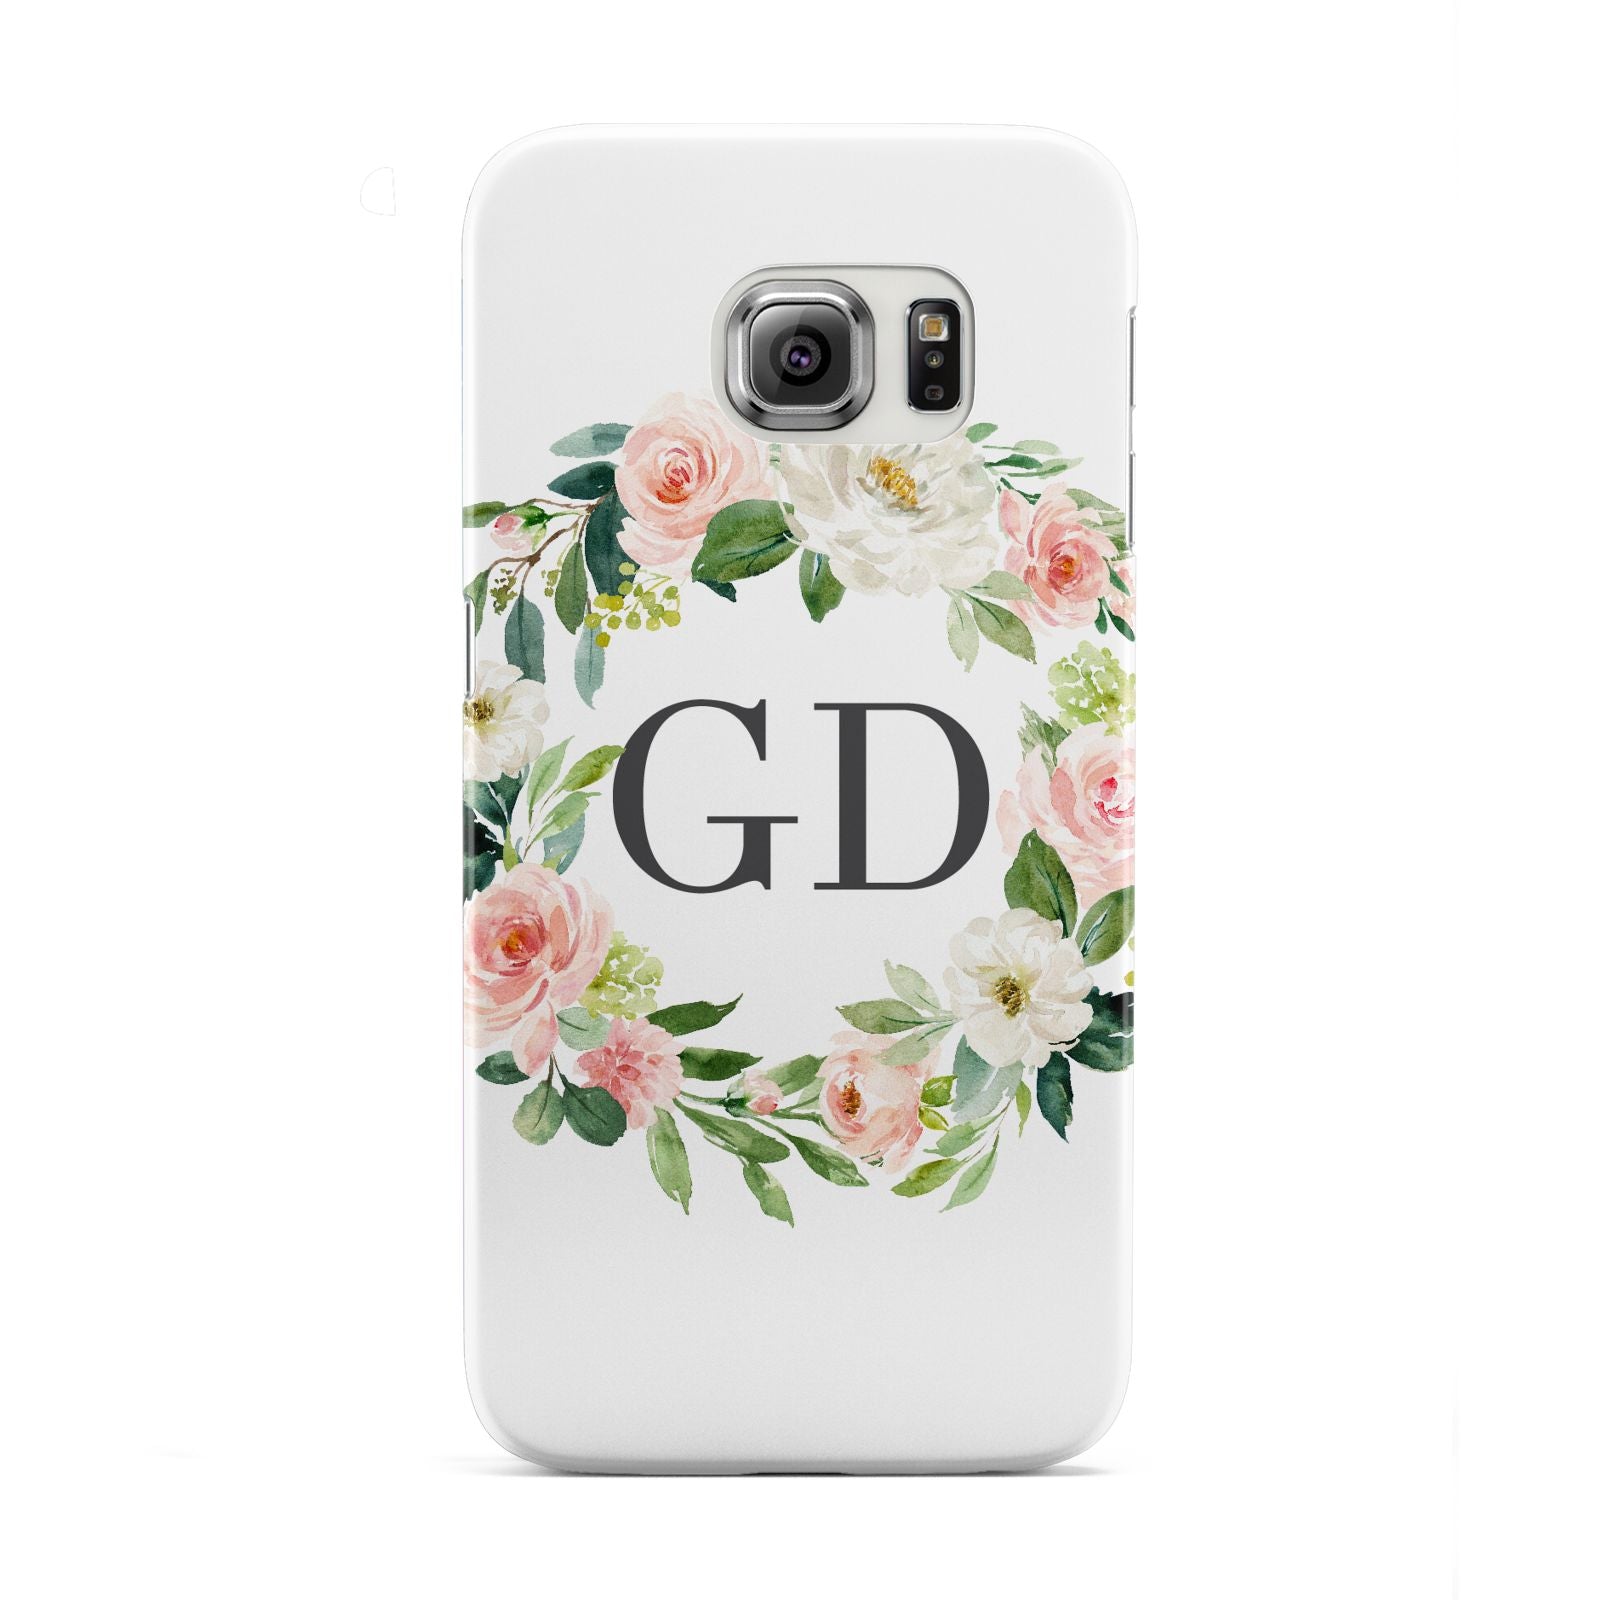 Personalised floral wreath Samsung Galaxy S6 Edge Case